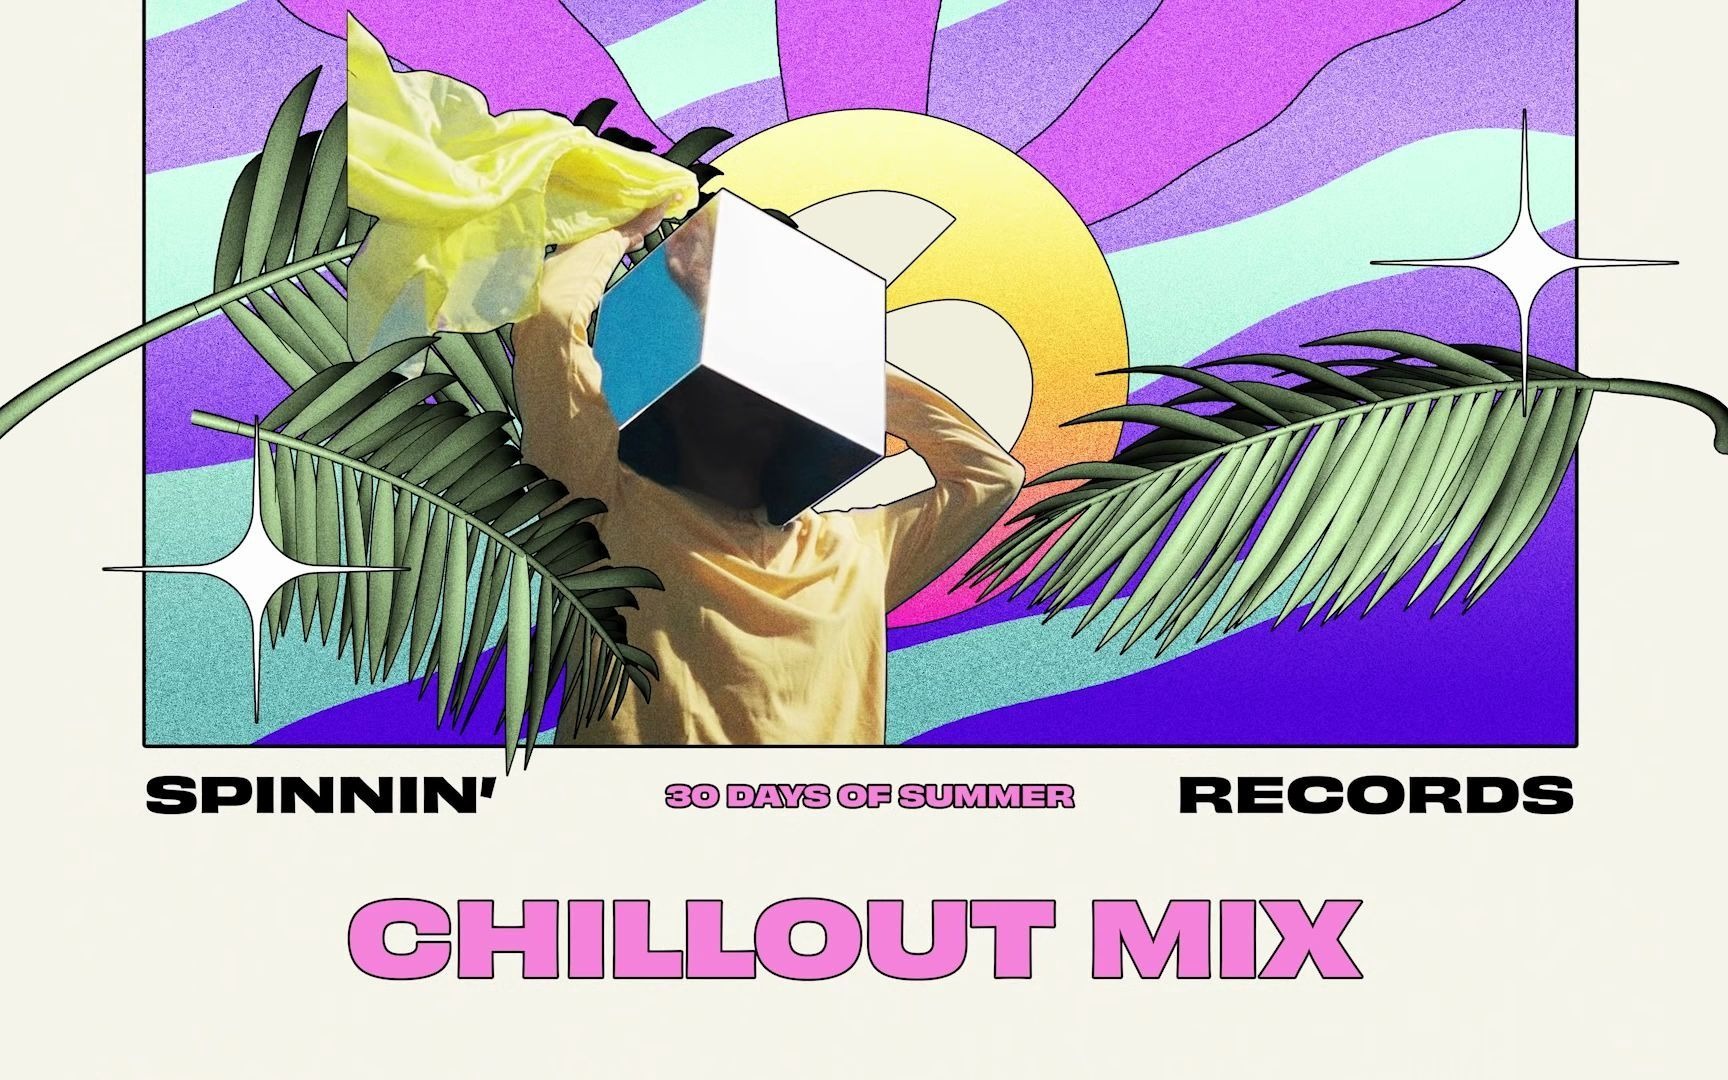 Chillout Mix by Caius Spinnin' 30 Days Of Summer Mixes 007